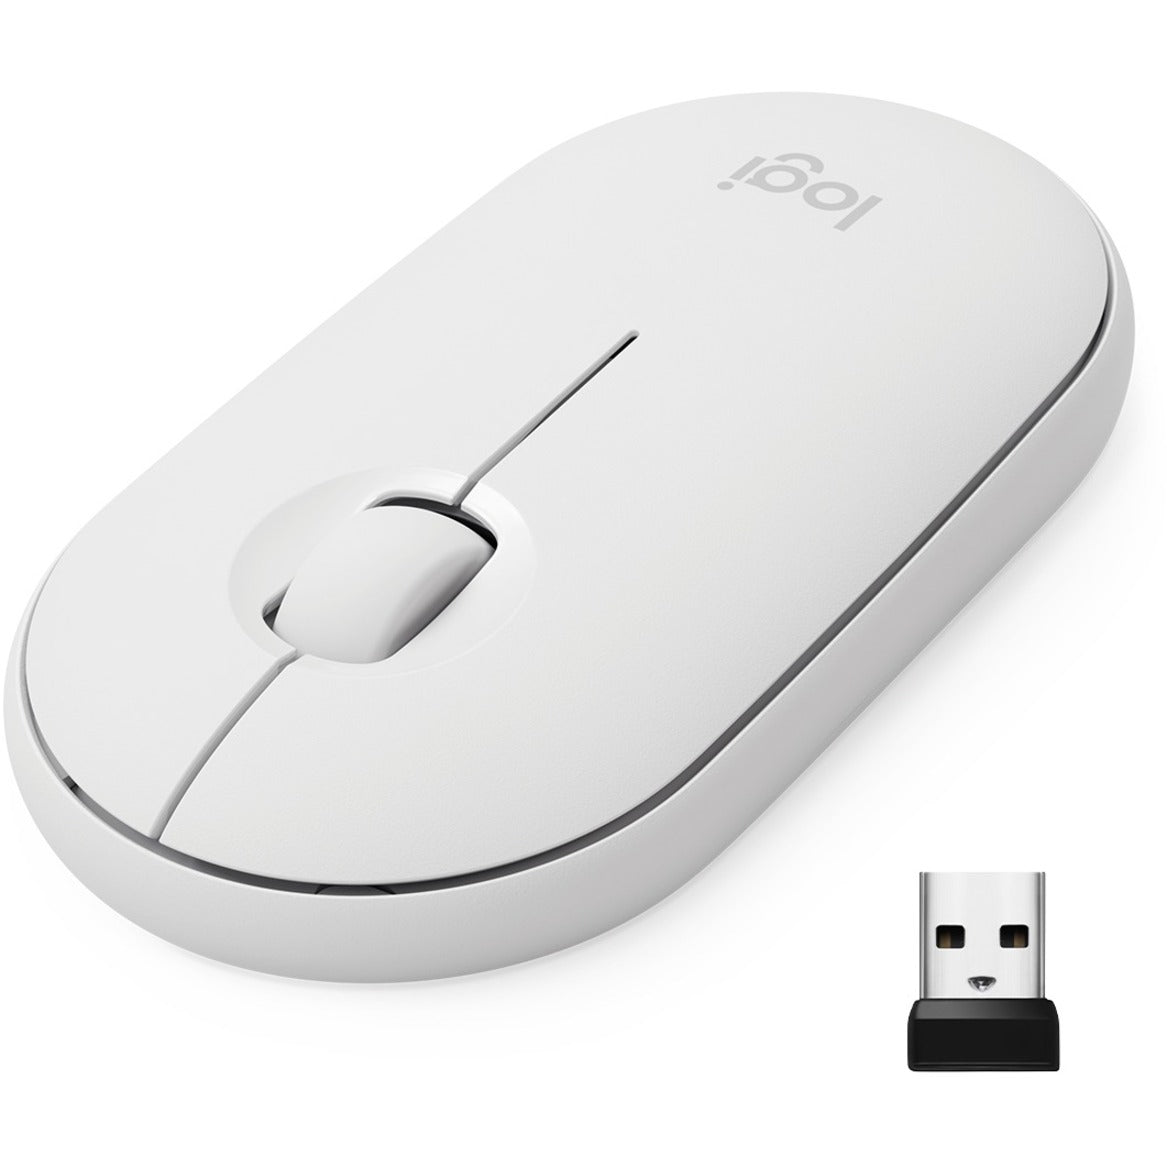 Logitech Pebble Wireless Mouse M350 - Bluetooth/Radio Frequency, Optical, Off White [Discontinued]